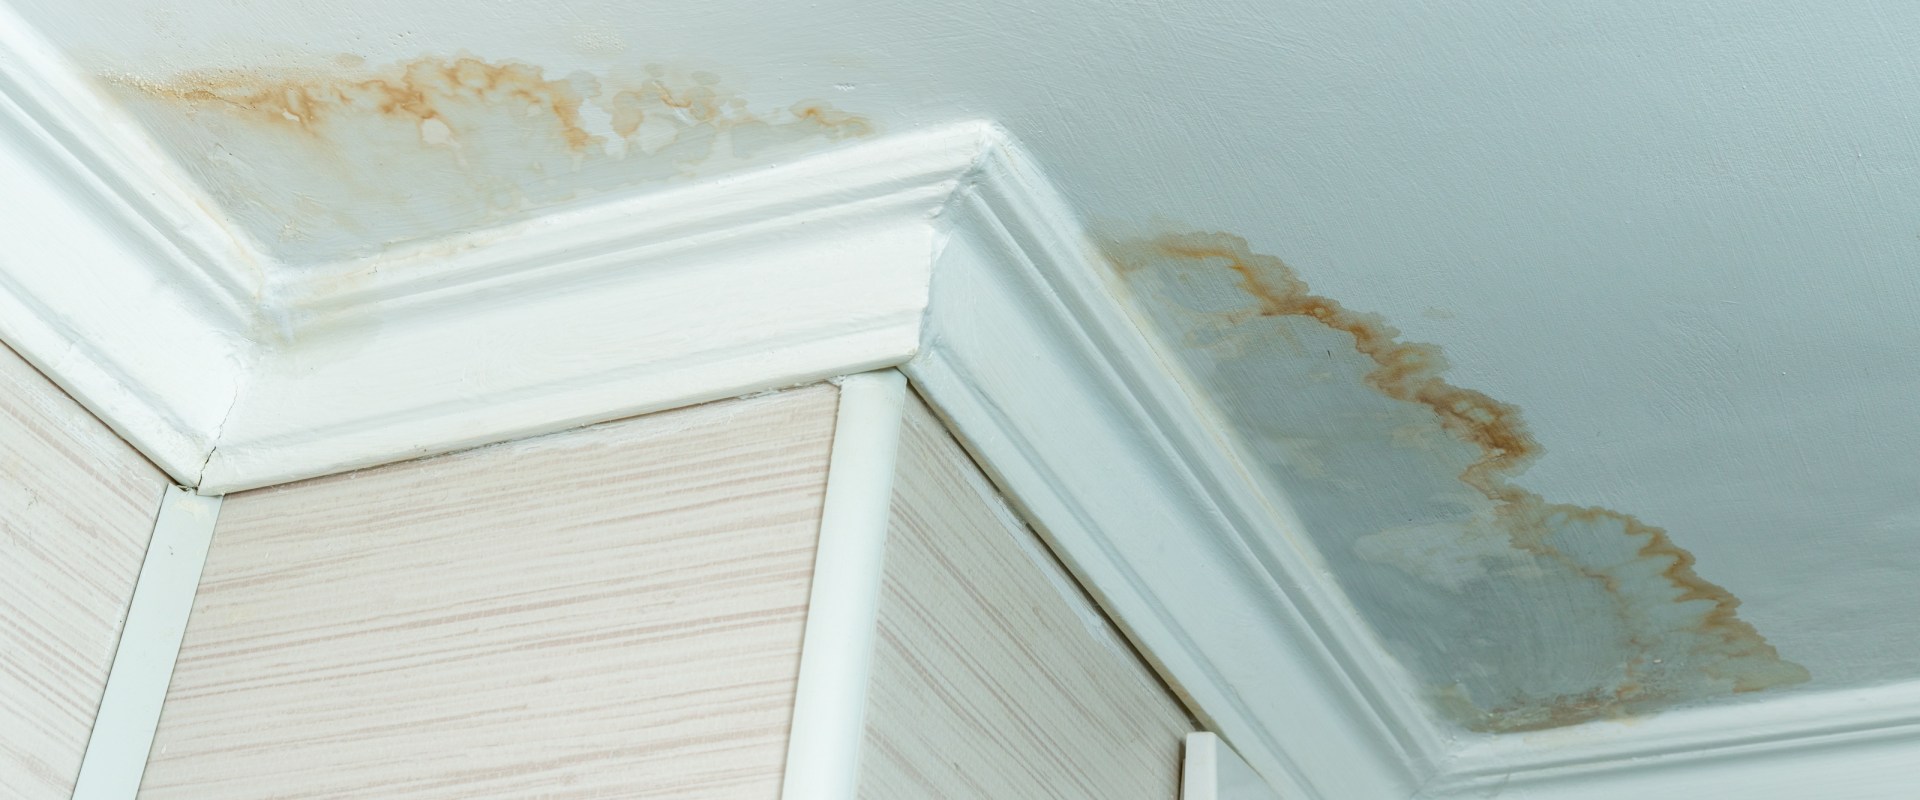 What Does Water Damage on Paint Look Like?